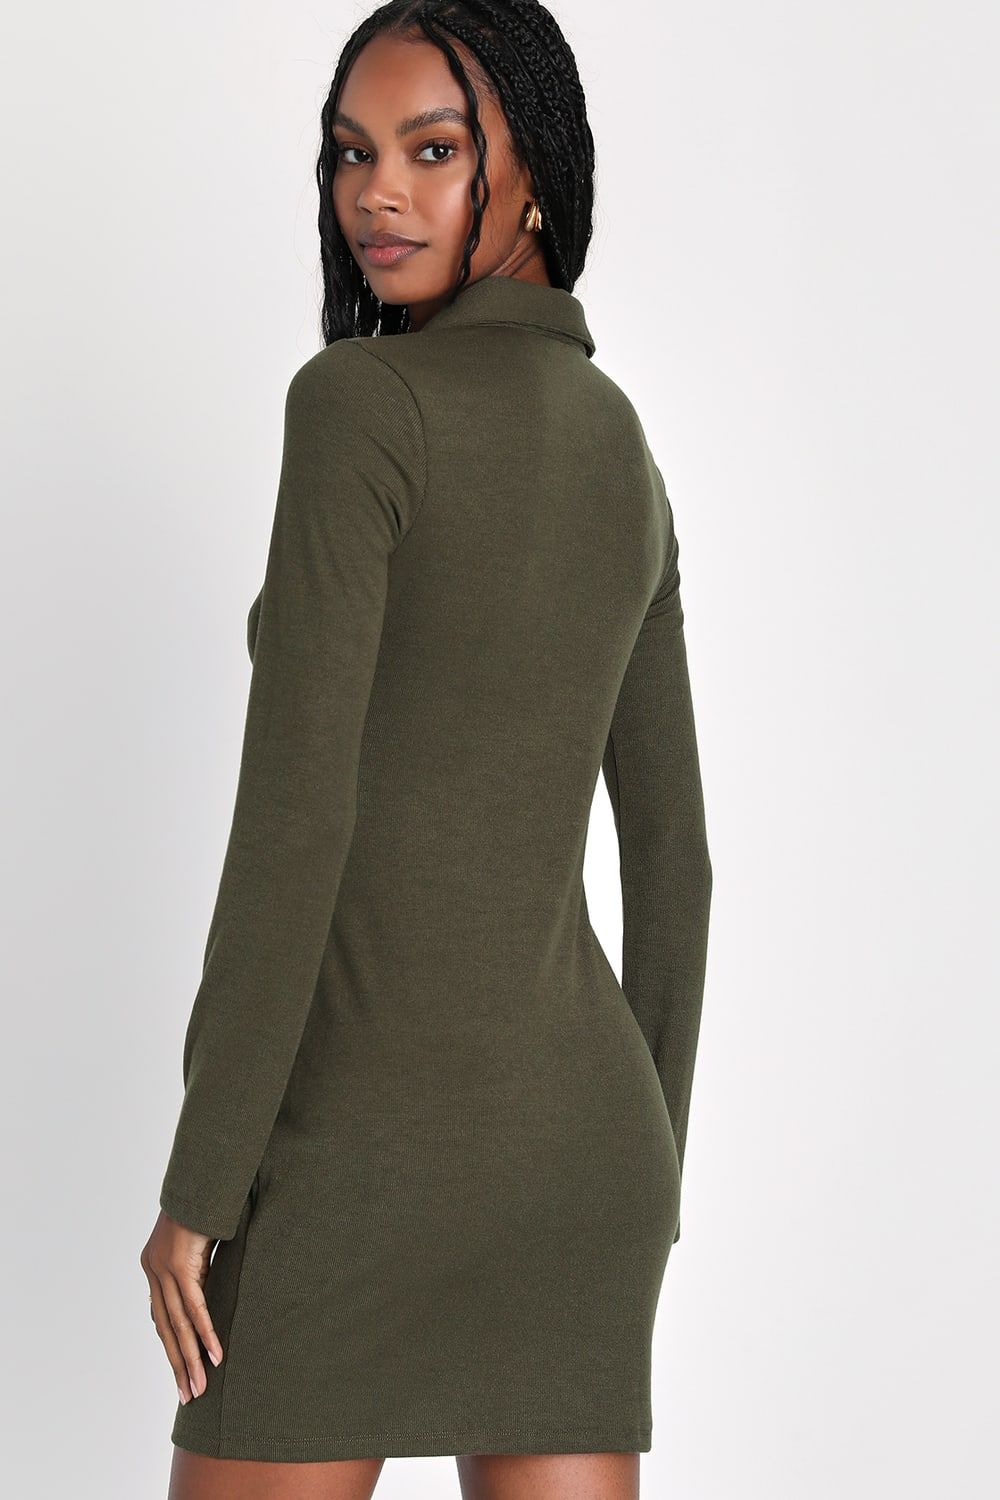 A Little Prep Olive Green Button-Up Bodycon Mini Dress | Lulus (US)